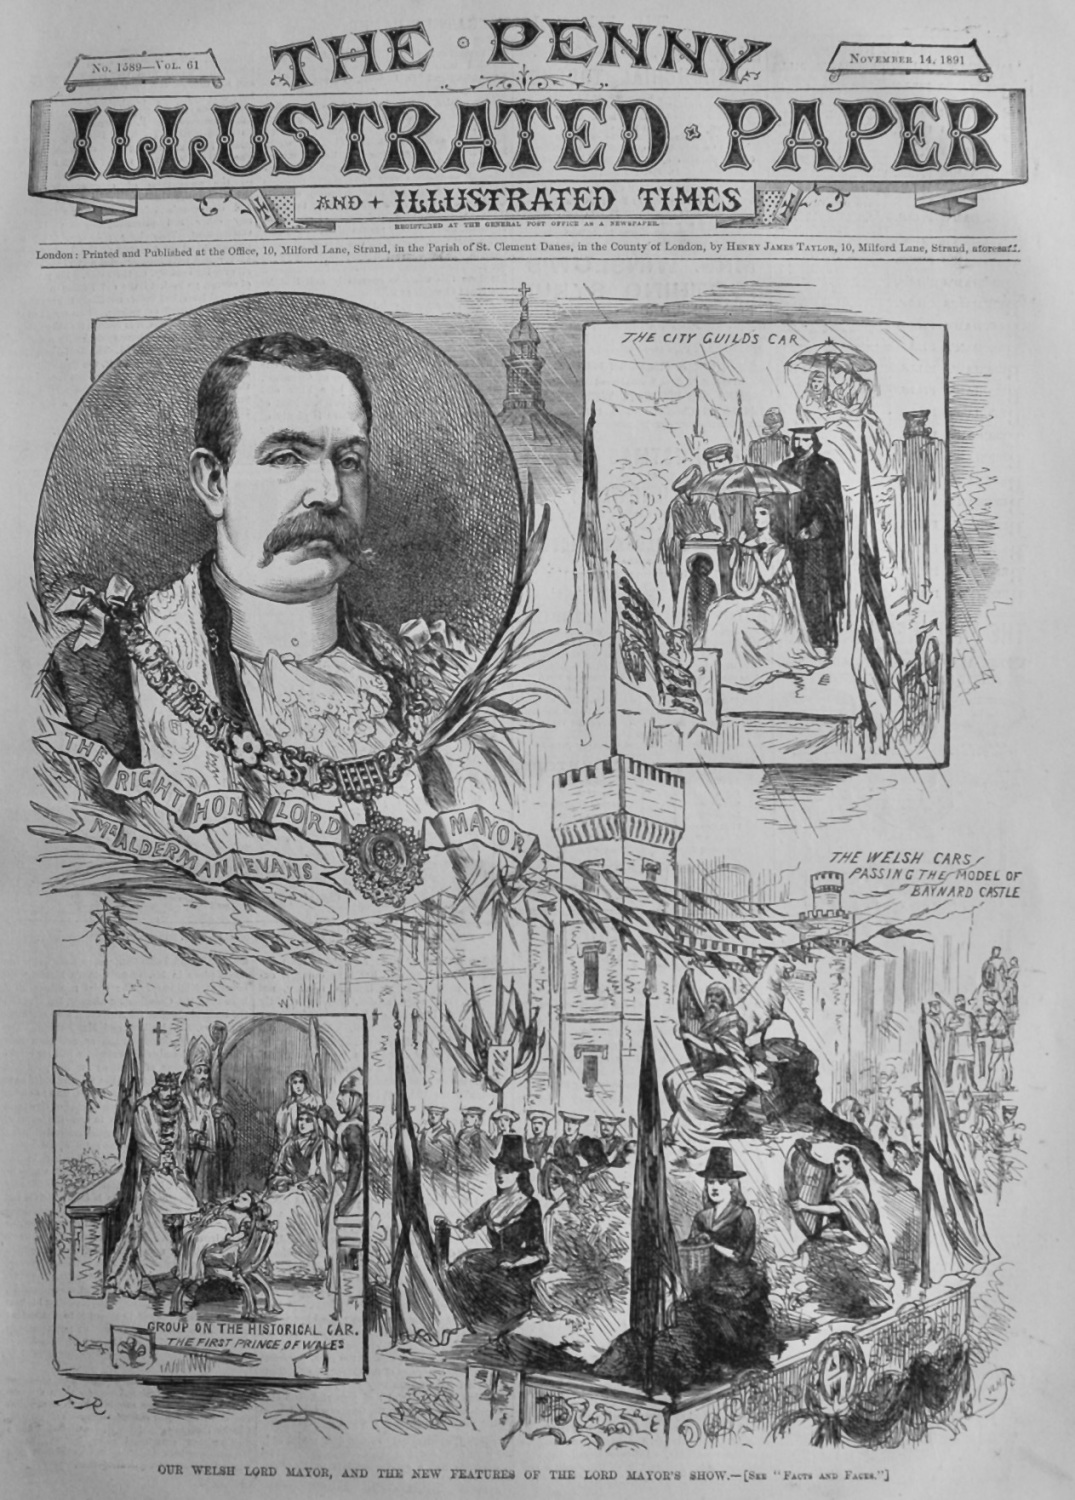 Our Welsh Lord Mayor, and the New Features of the Lord Mayor's Show.  1891.